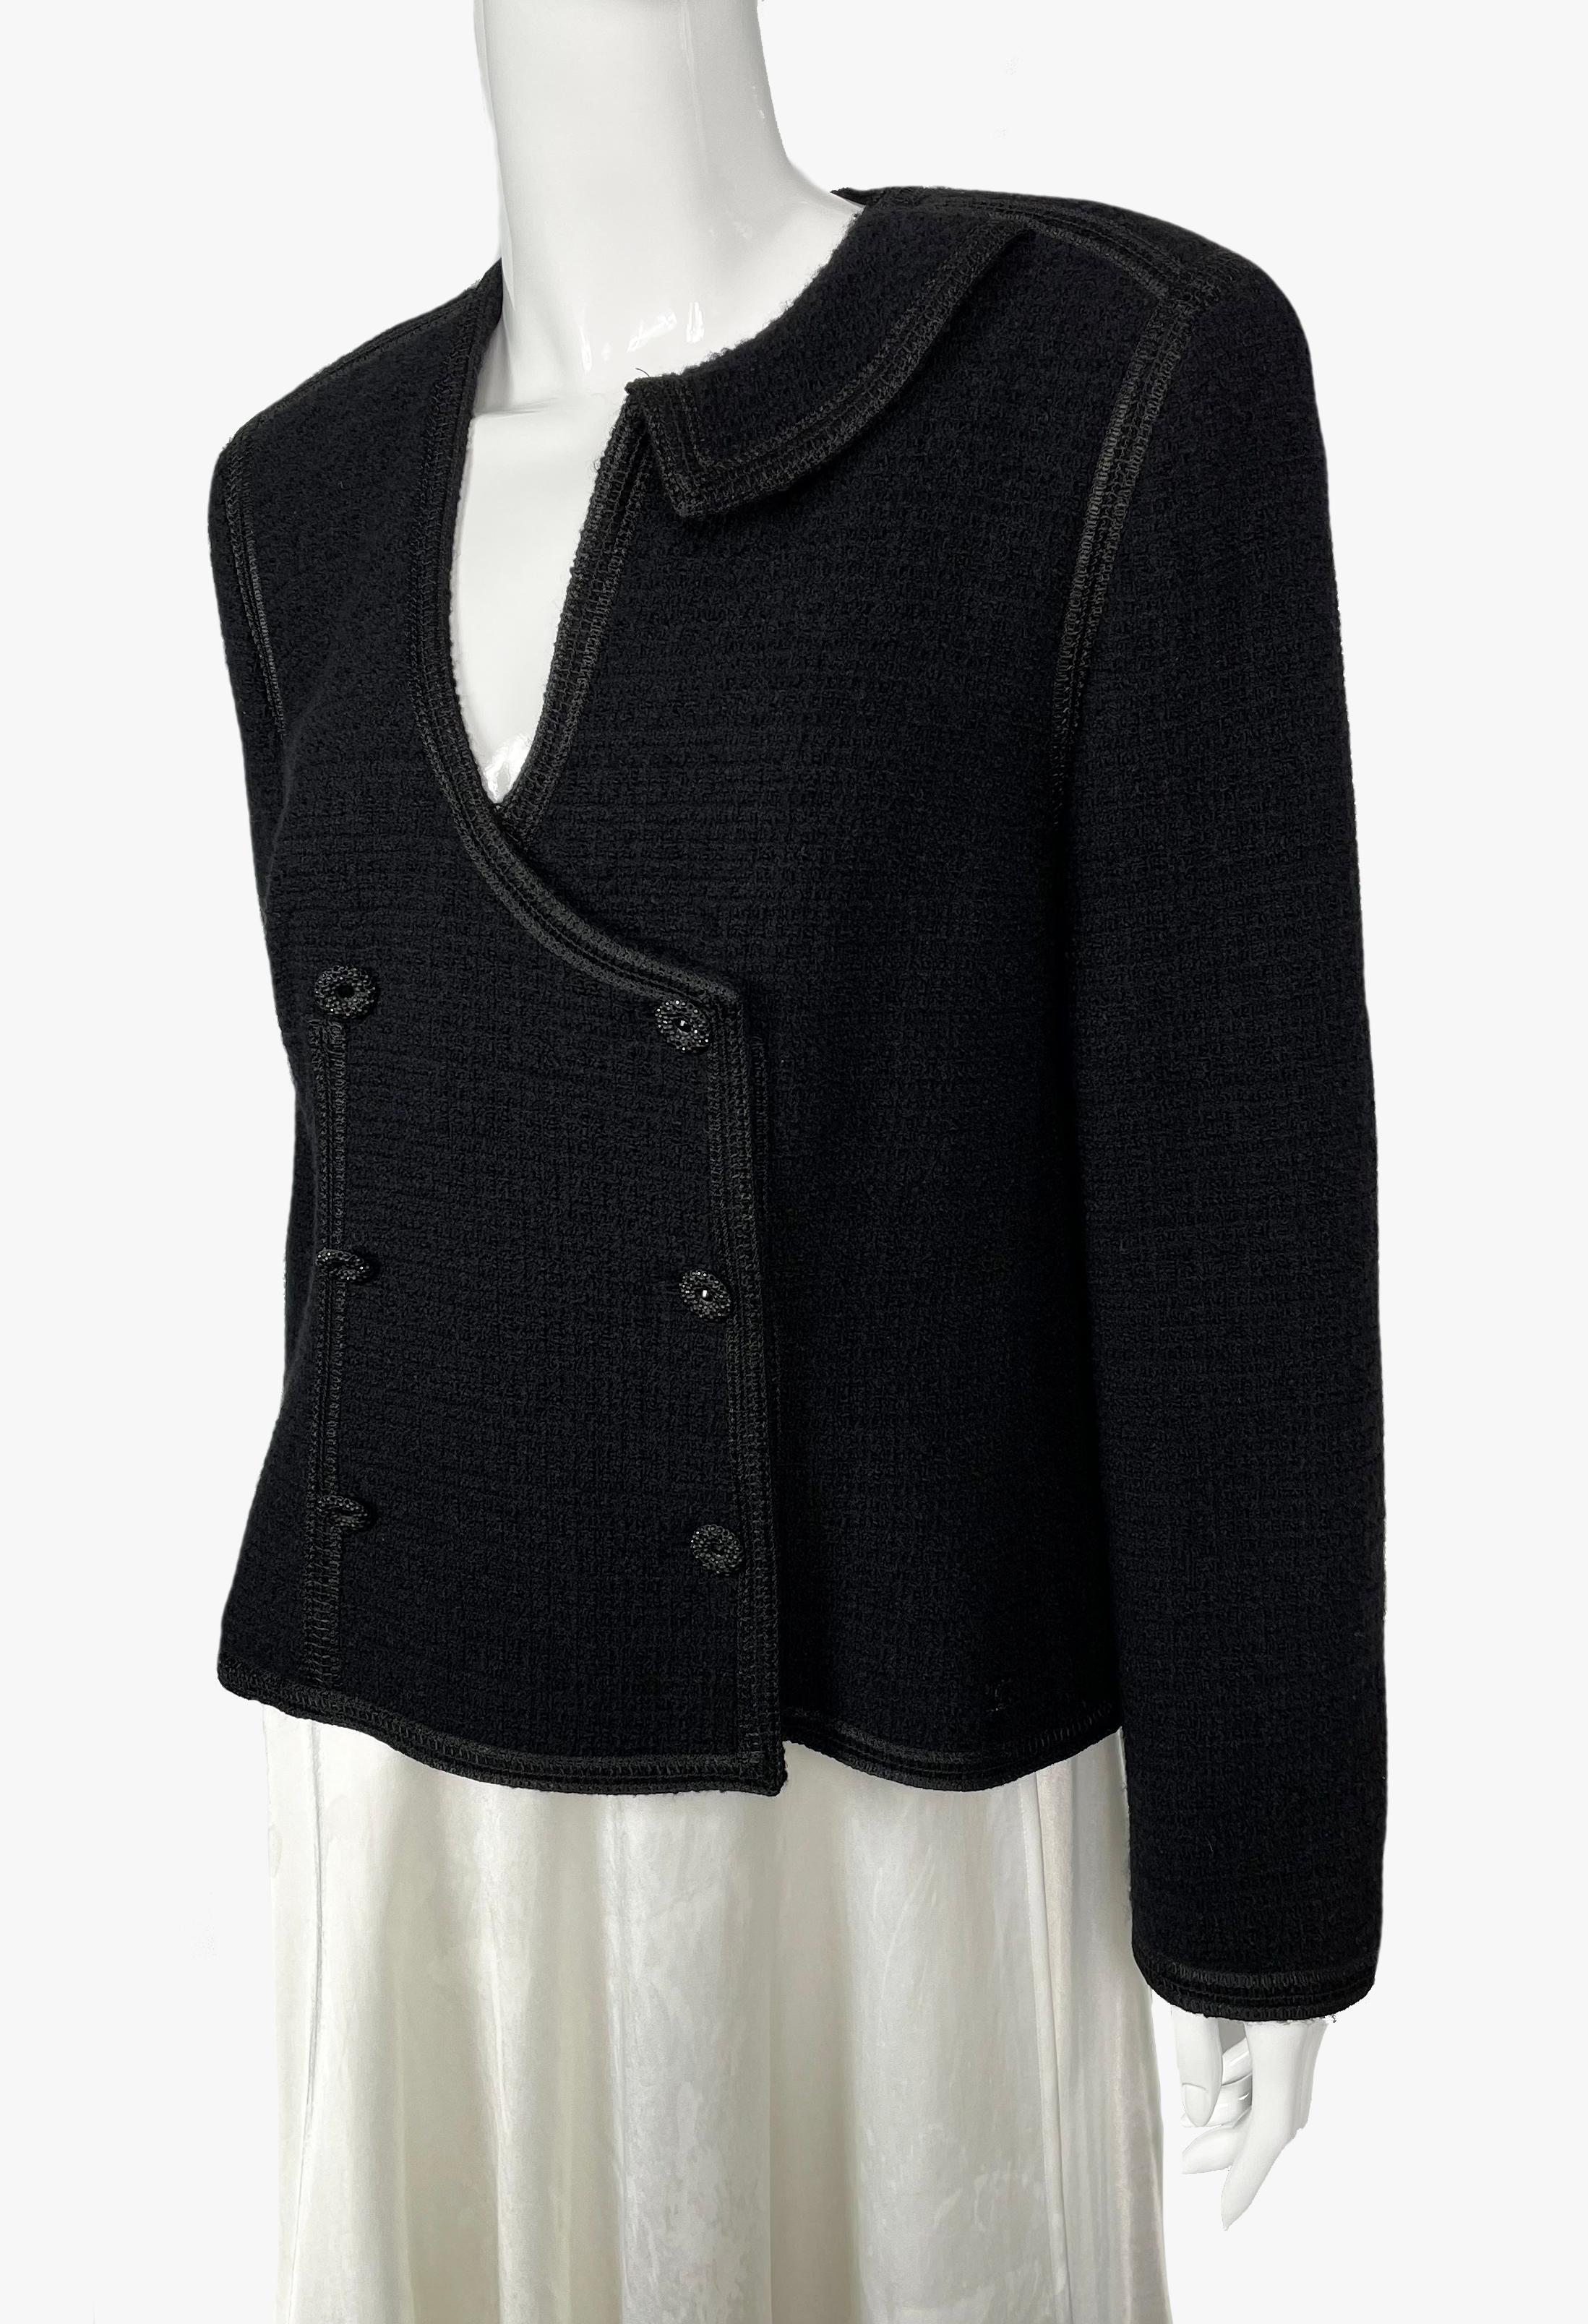 Chanel Black Vintage Jacket, Cruise 2002 Collection 1